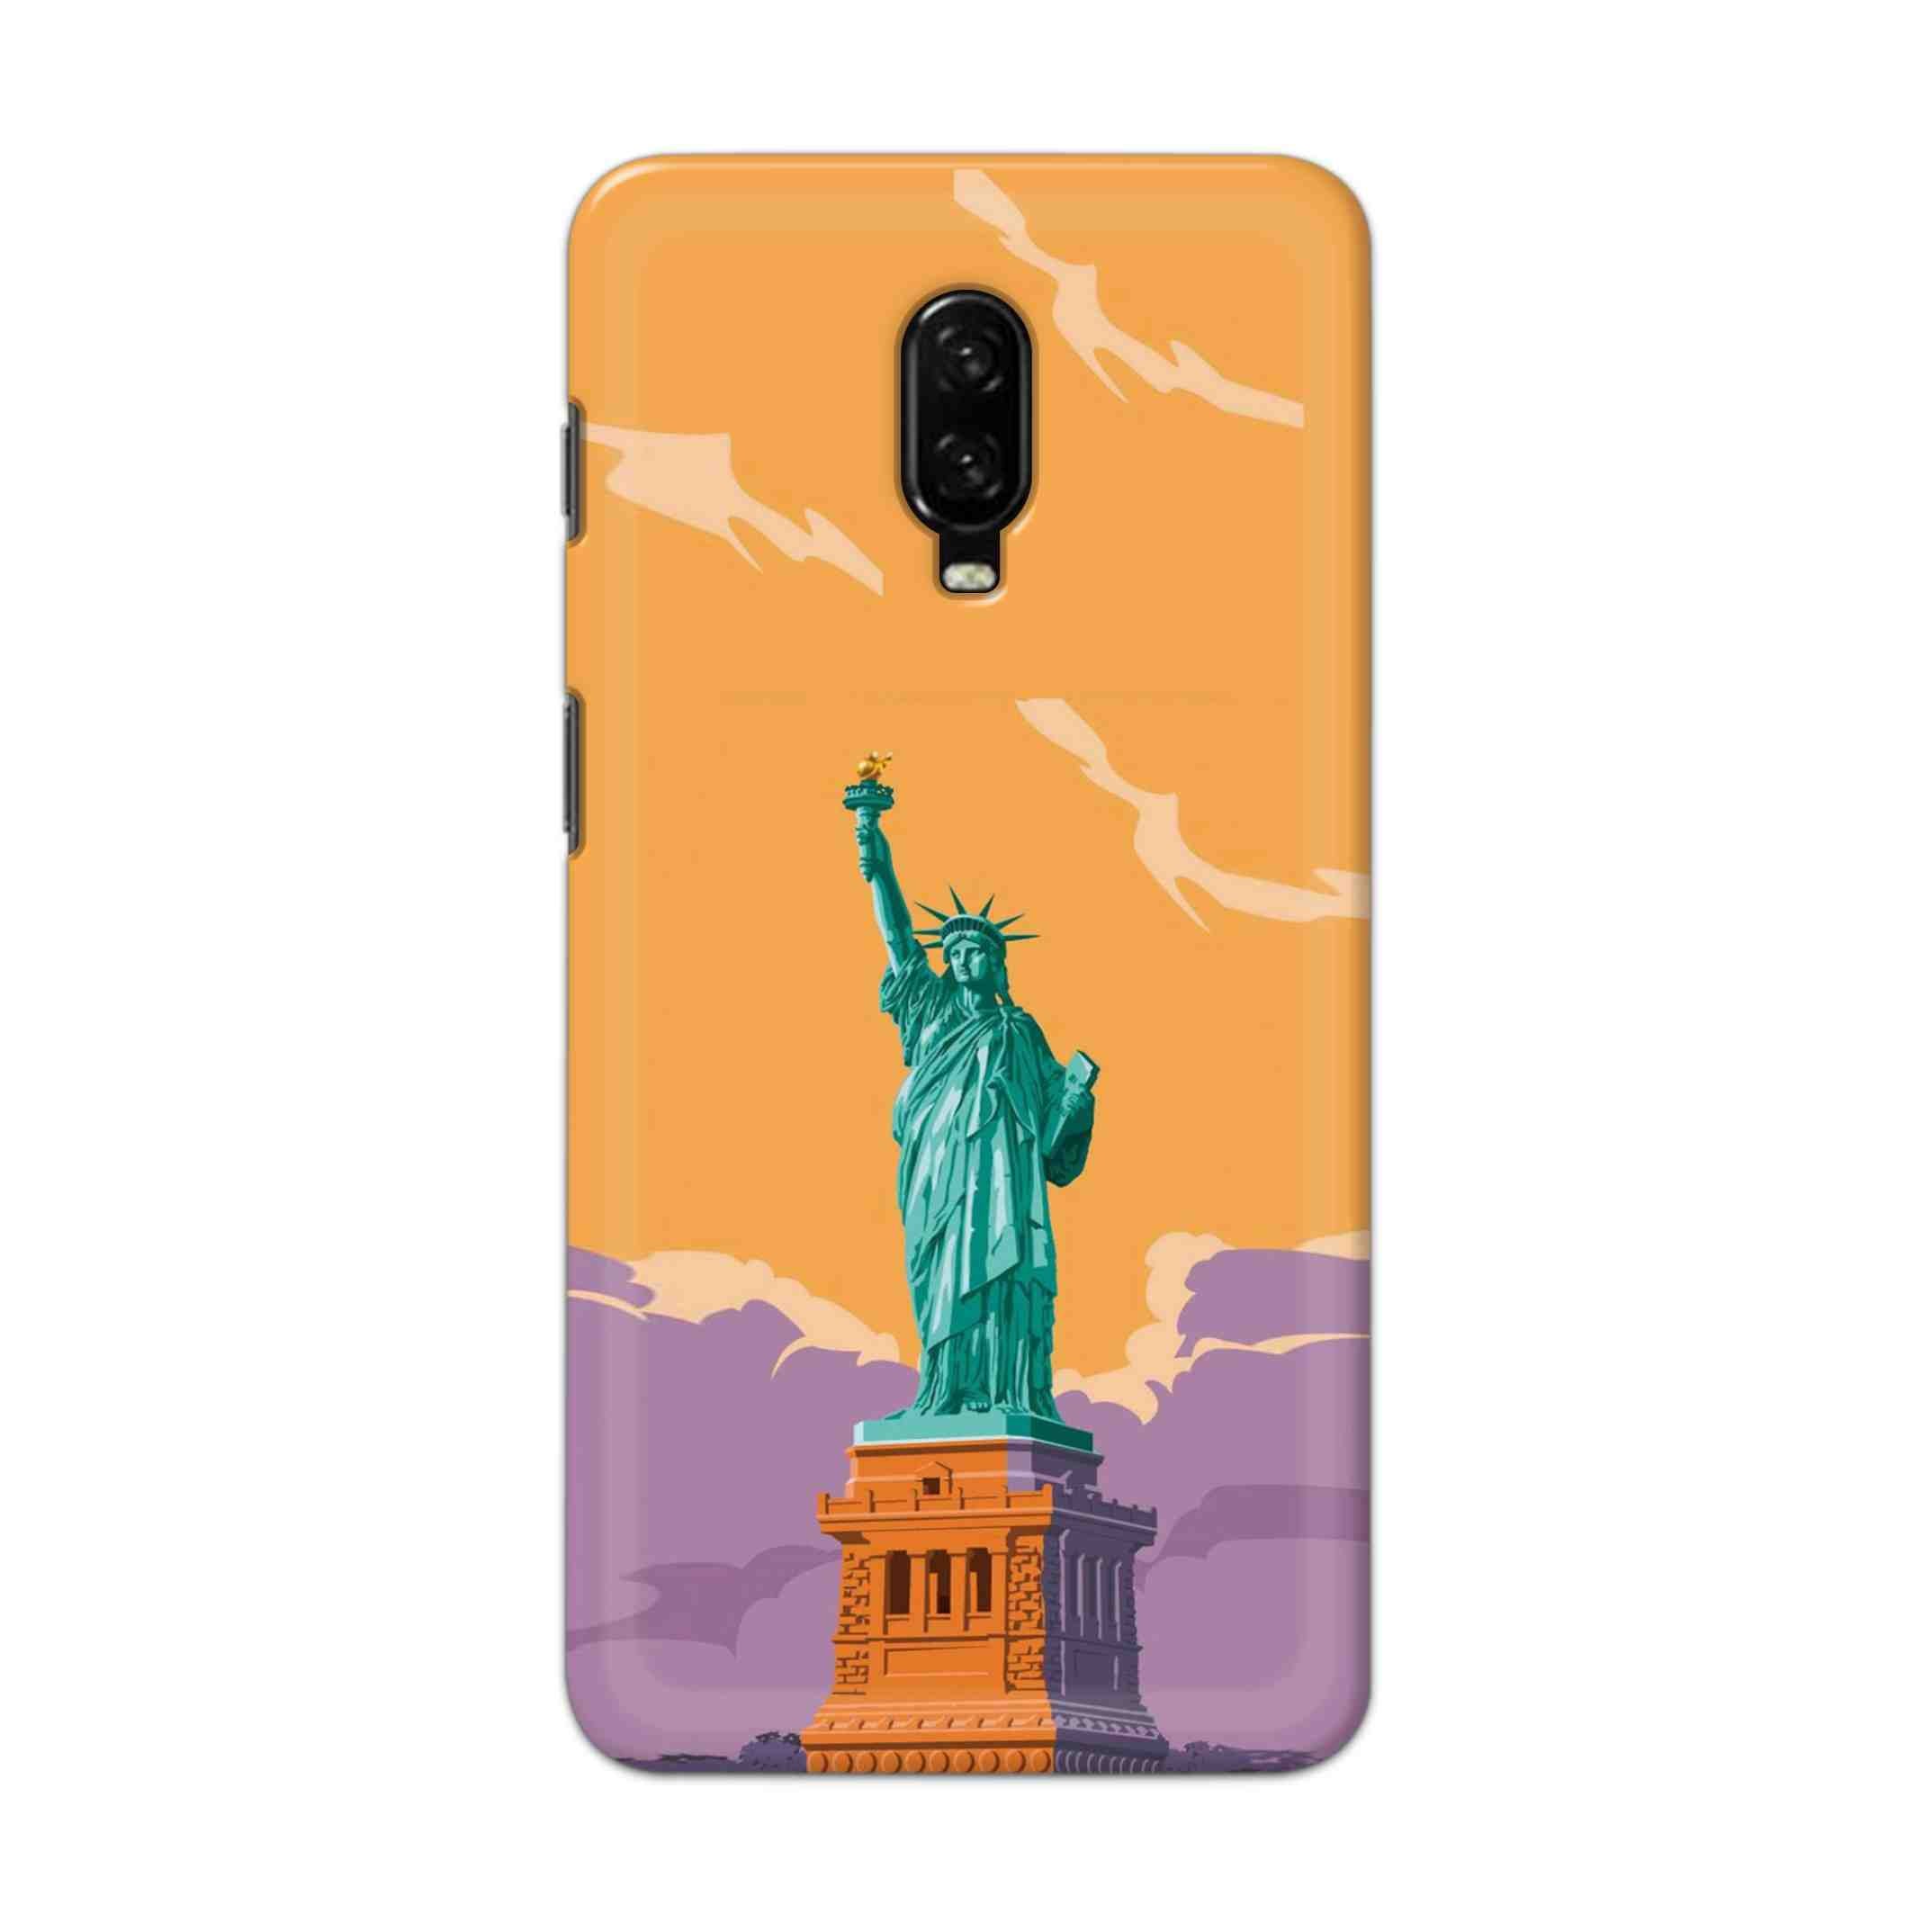 Buy Statue Of Liberty Hard Back Mobile Phone Case Cover For OnePlus 6T Online